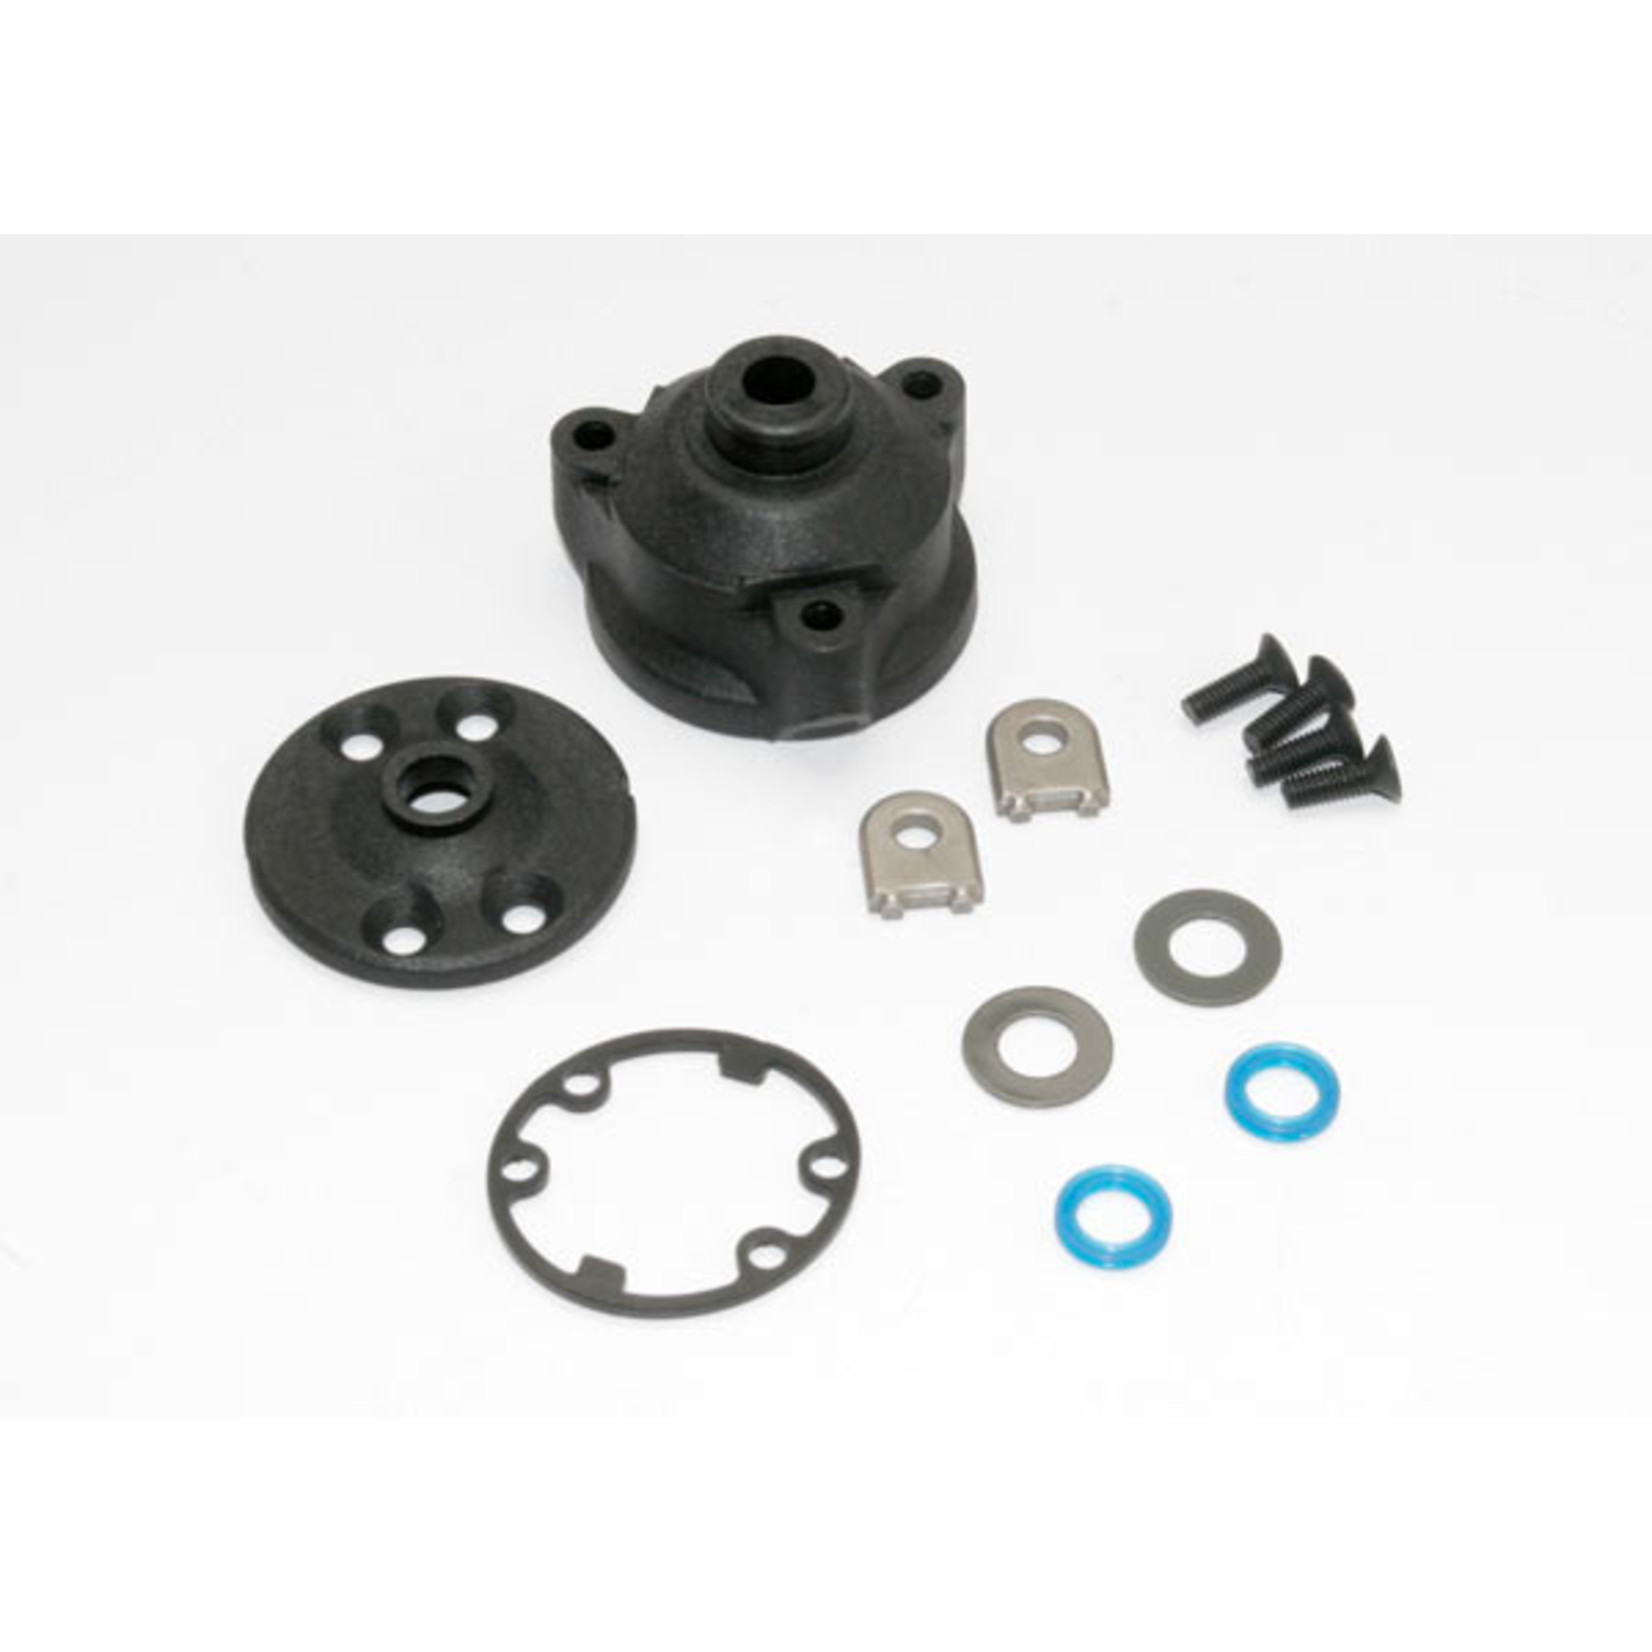 Traxxas 6884 - Housing, center differential/ x-ring gasket